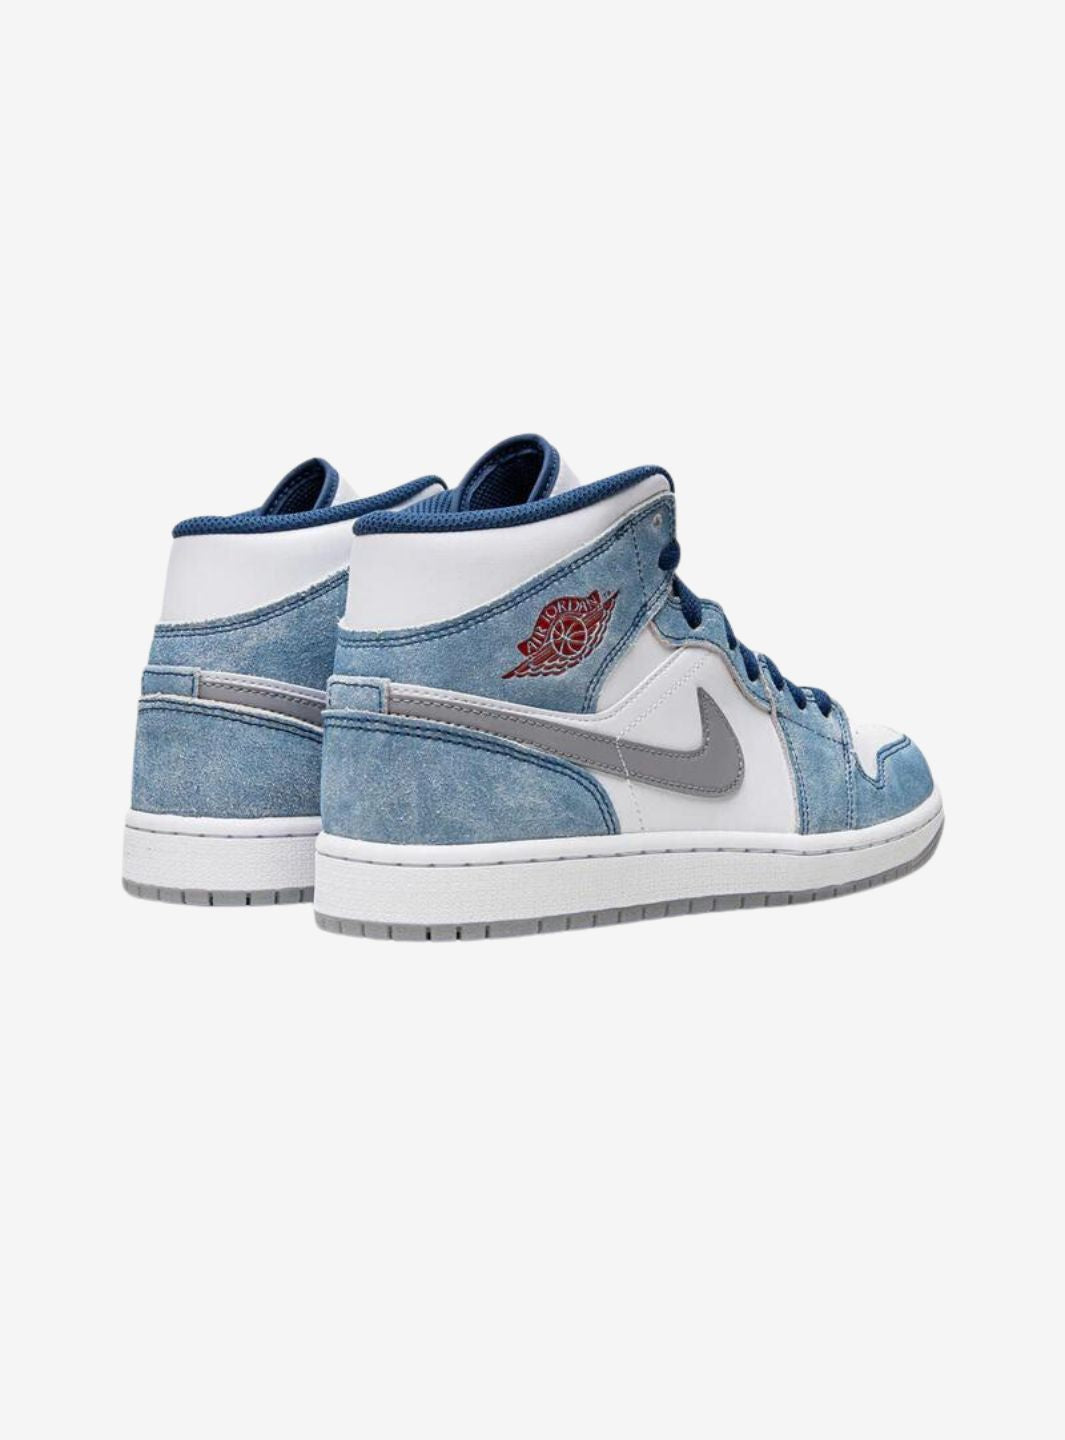 Air Jordan 1 Mid French Blue Fire Red - DN3706-401 | ResellZone